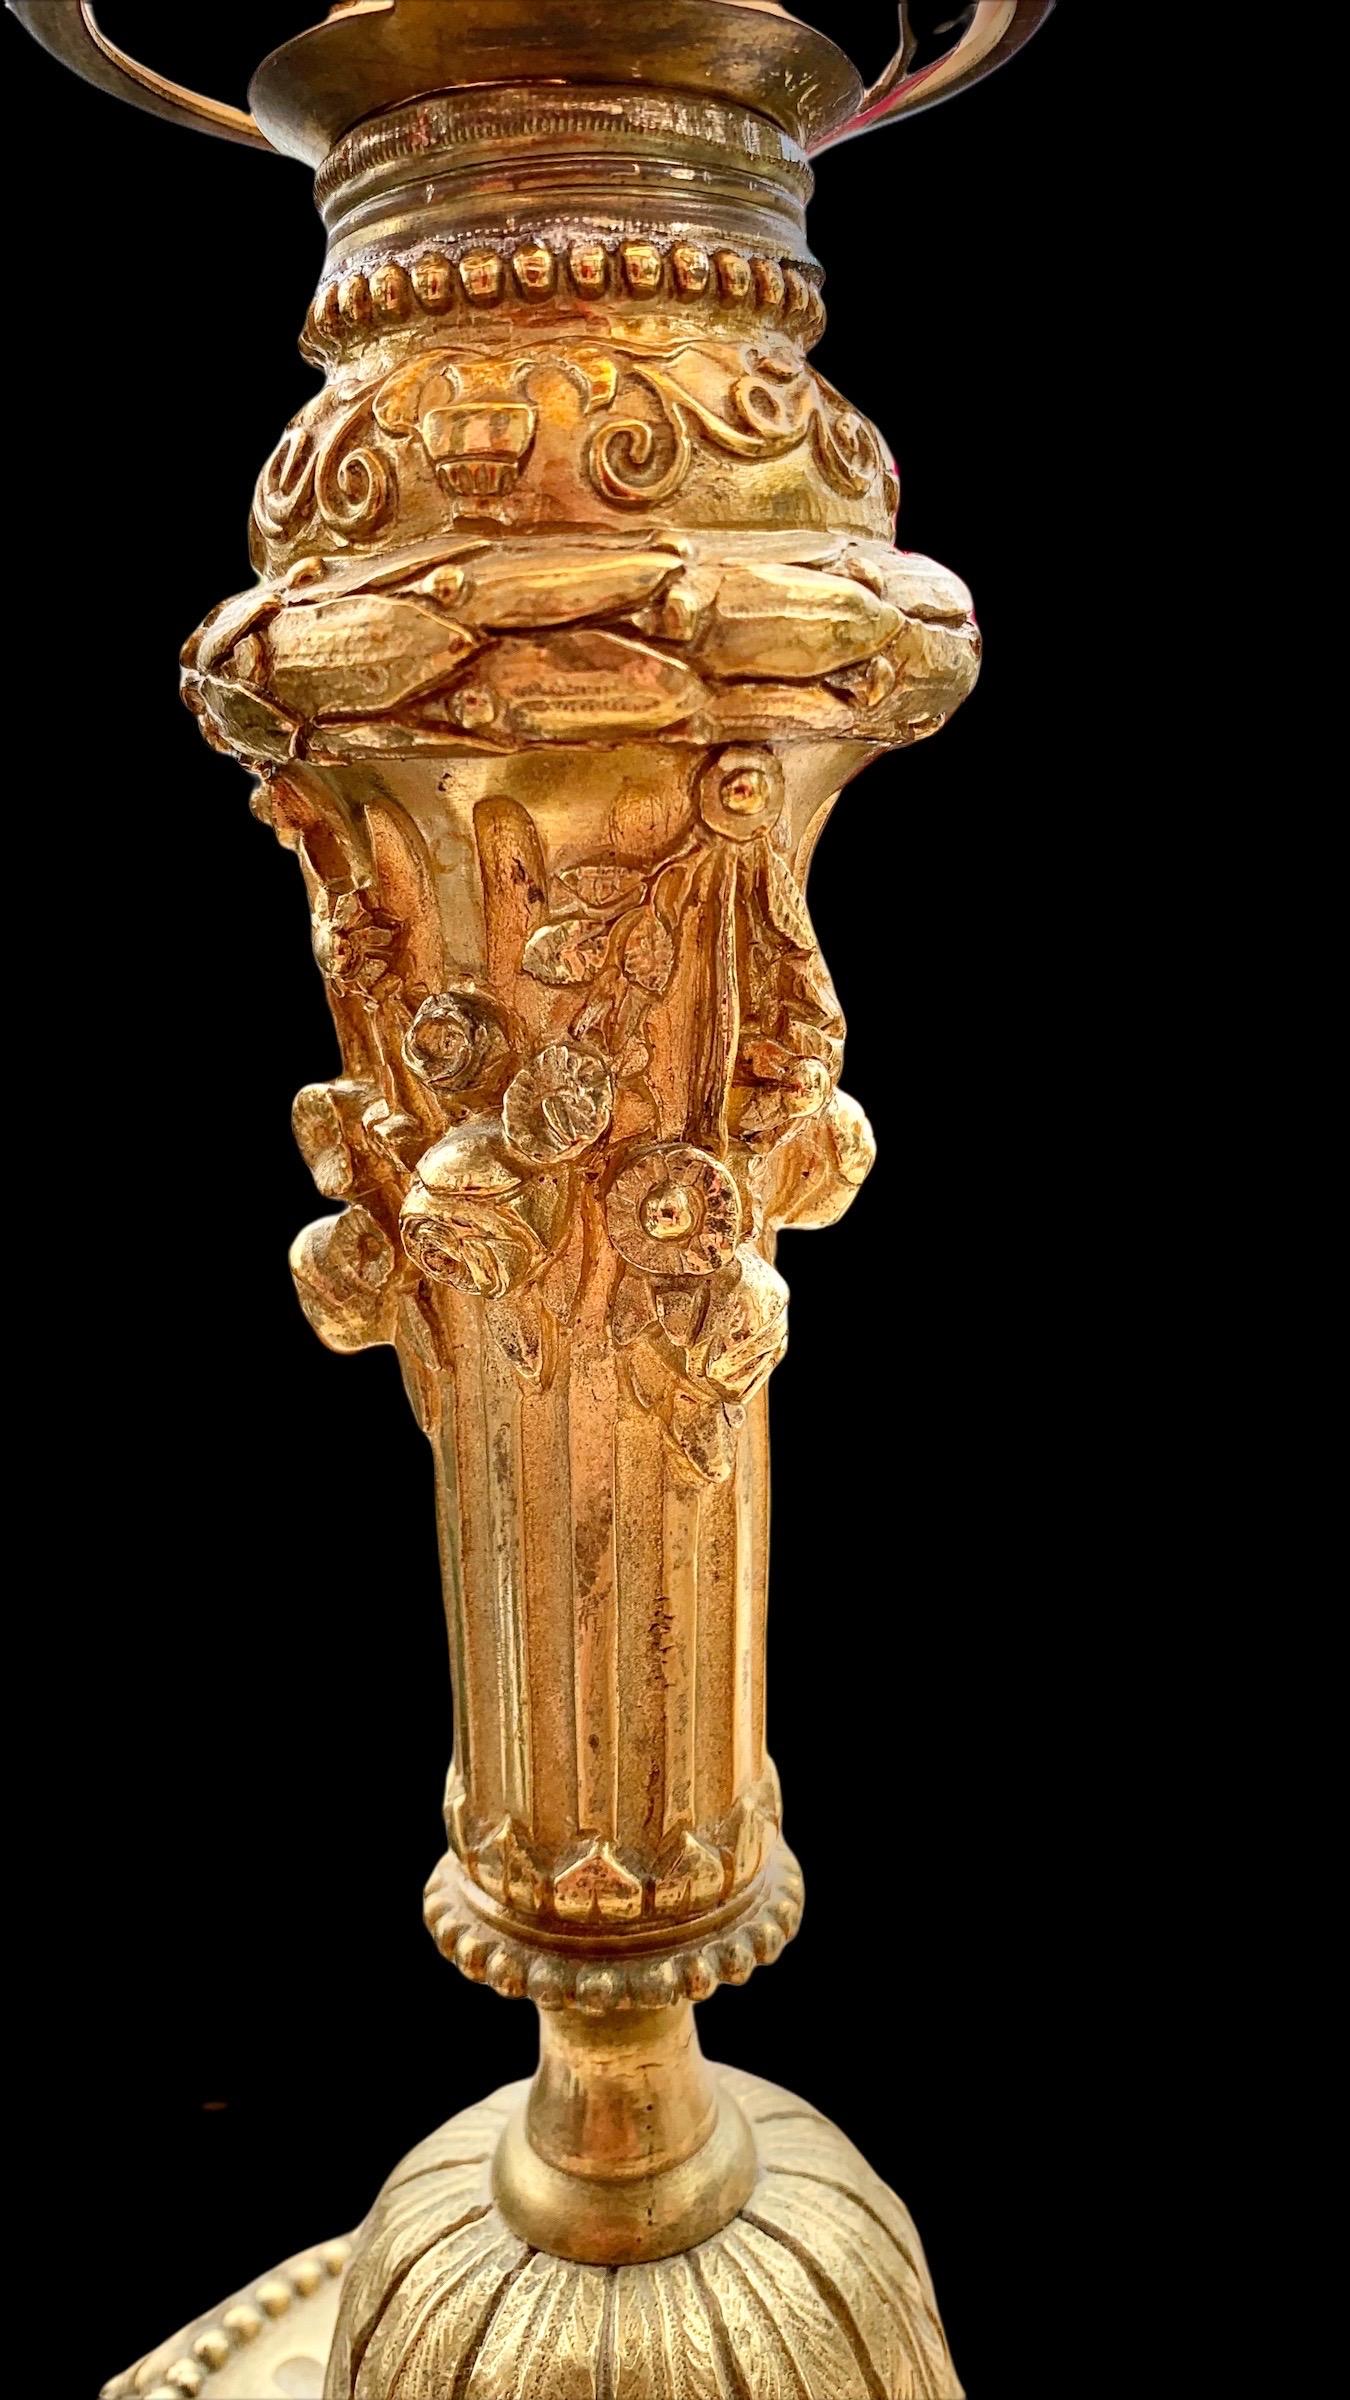 An exquisite example of the French Belle Epoch period gilded bronze candle stick lamp, beautifully cast with floral garlands and flowers, the base encircled with petals and flowers. The flame shade frosted and lovely. A piece of French history of